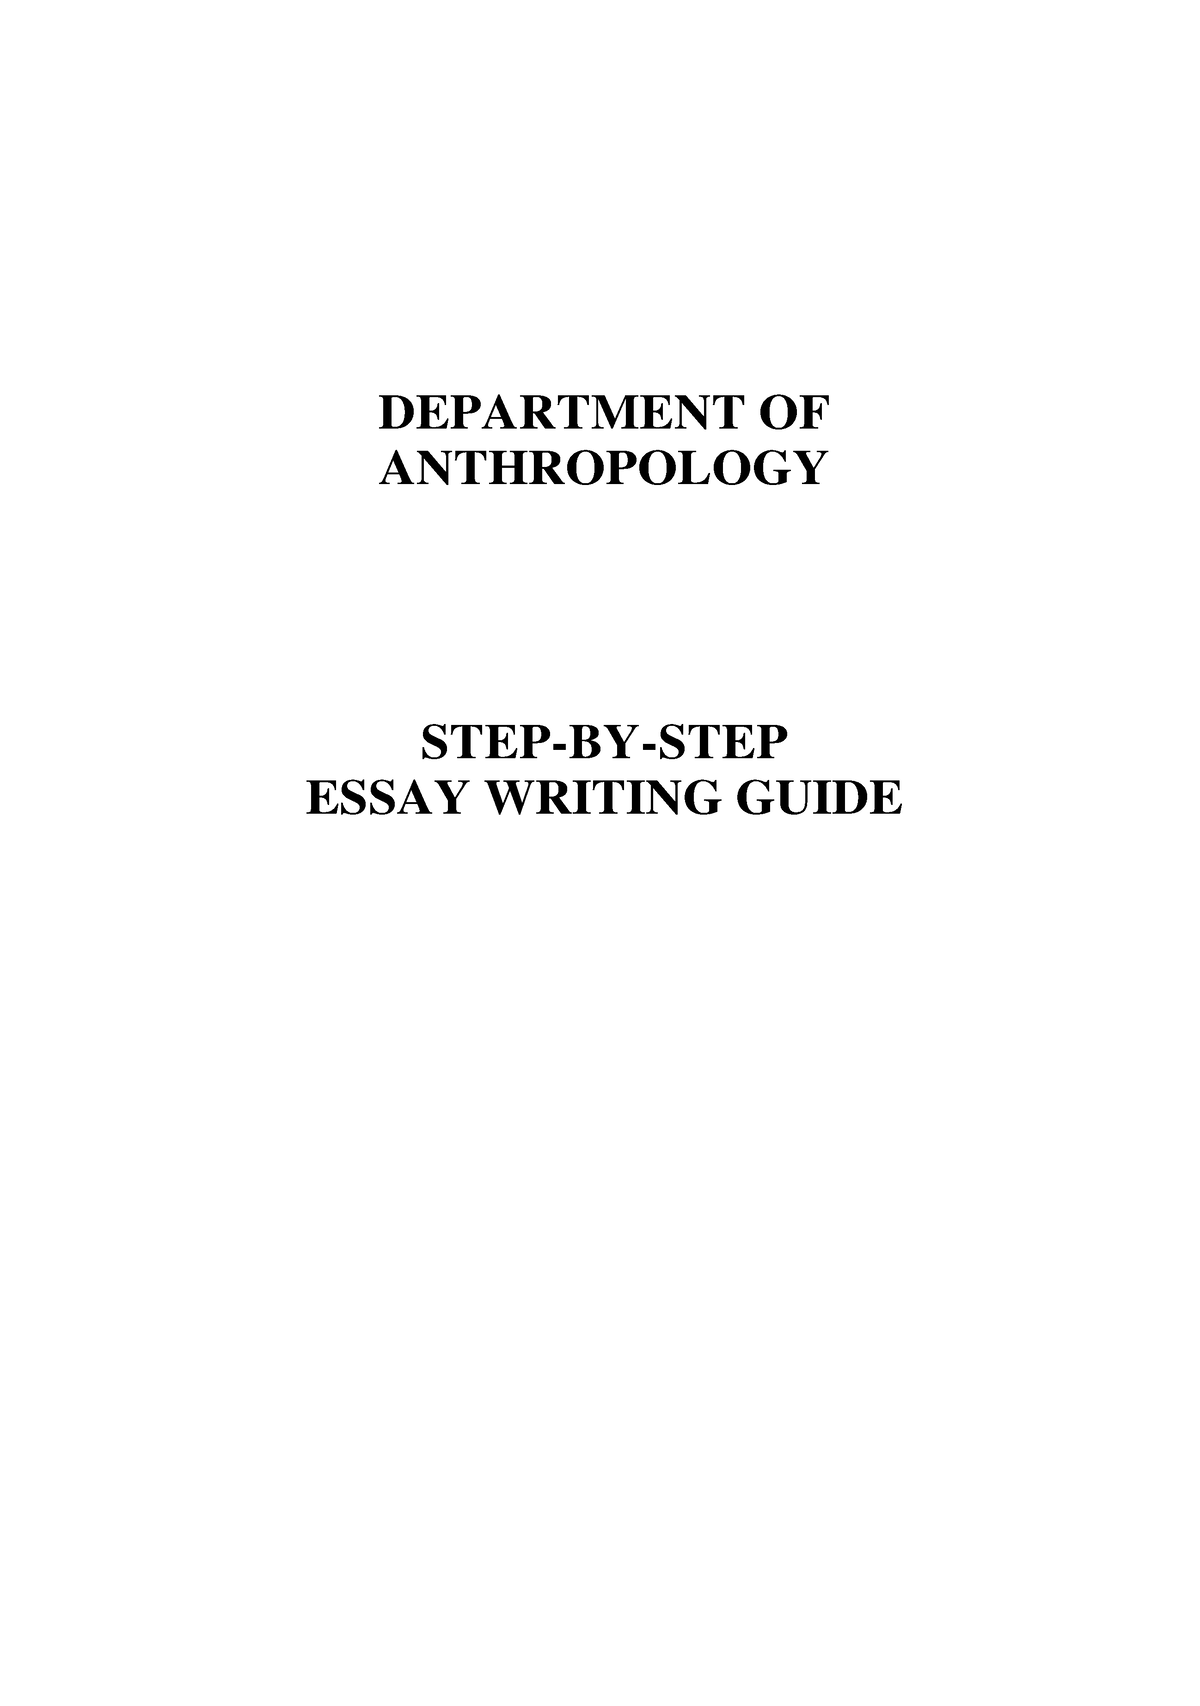 how to write an introduction for an anthropology essay